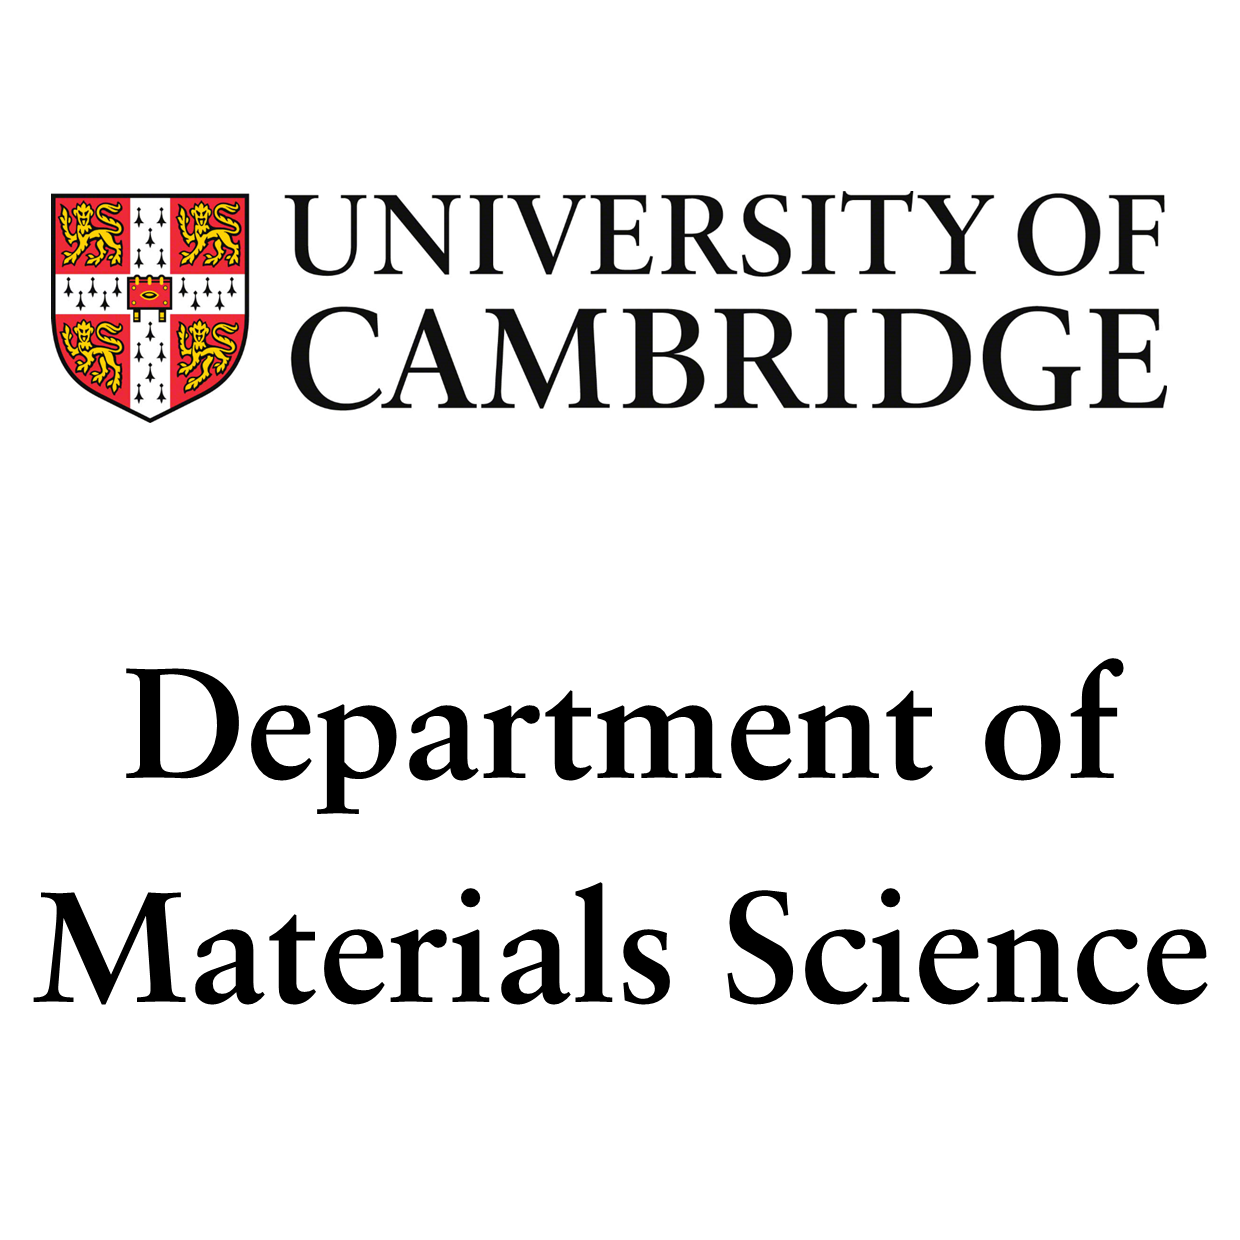 Physics at Work 2020 - Department of Materials Science's image